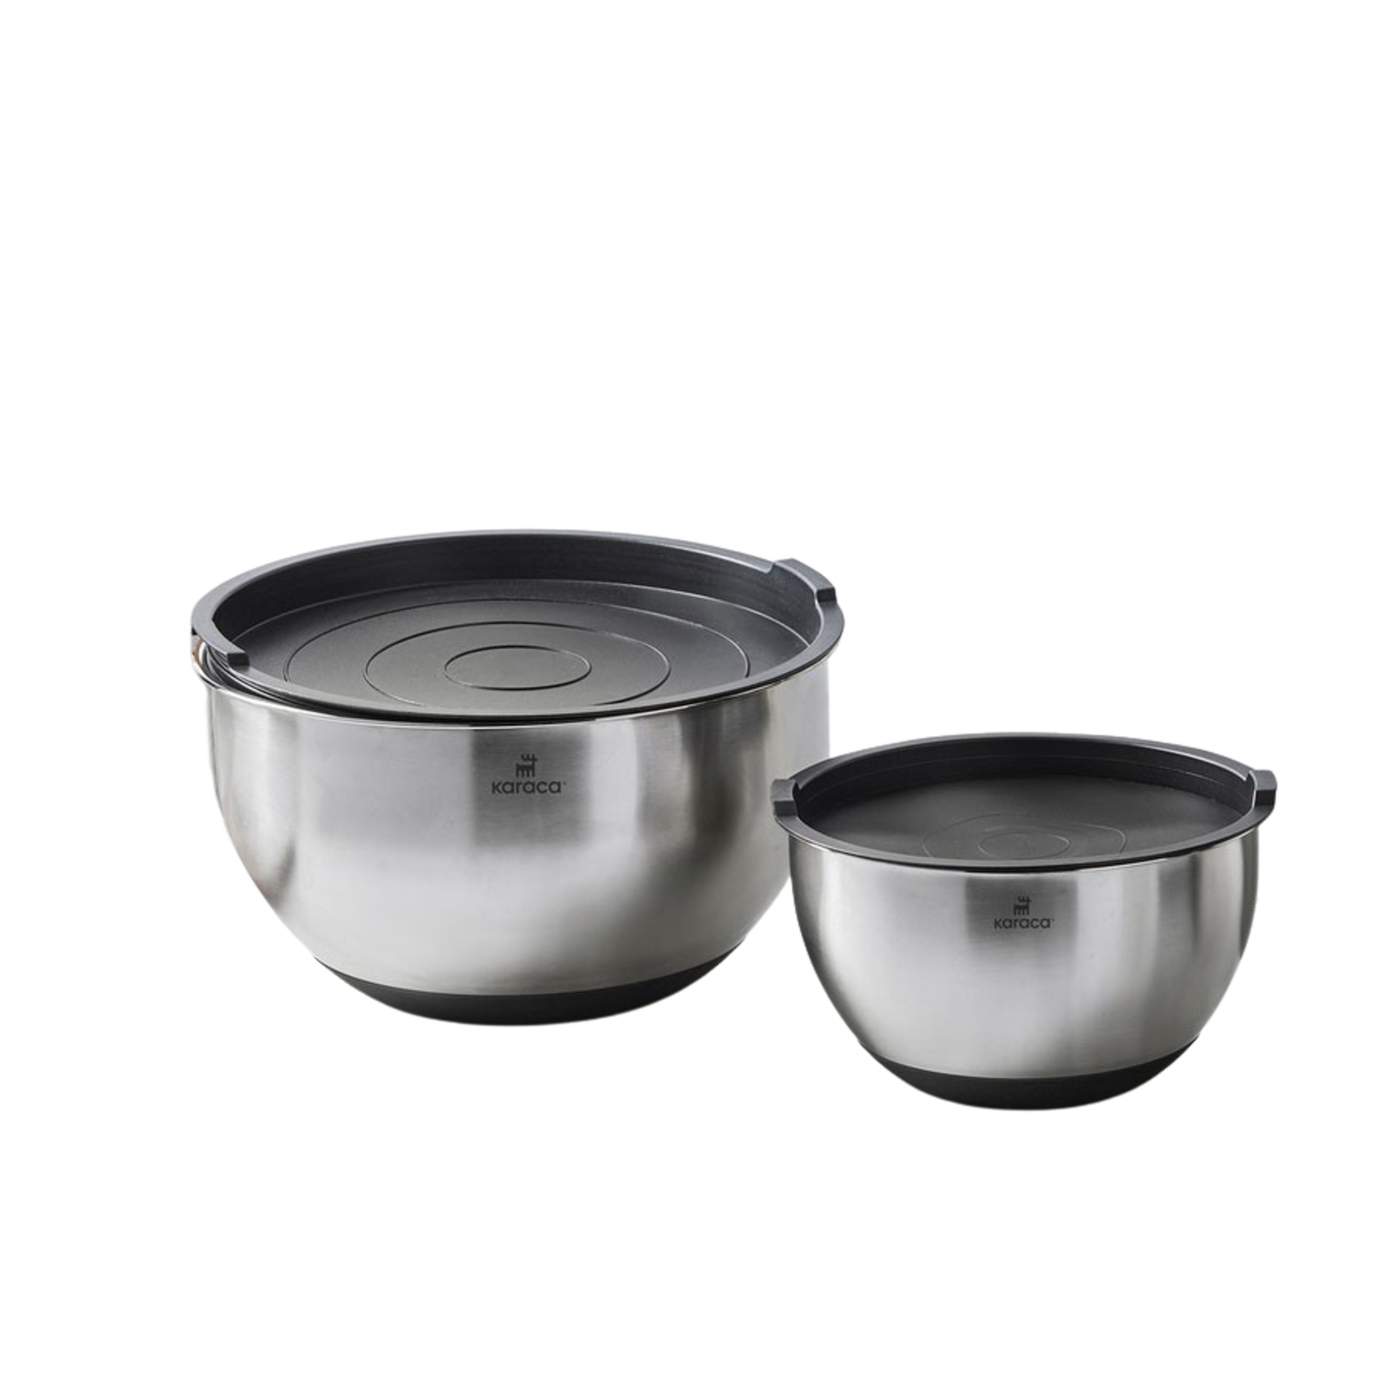 Karaca 2 Piece Stainless Steel Mixing Bowl Set with Lid, Silver Black